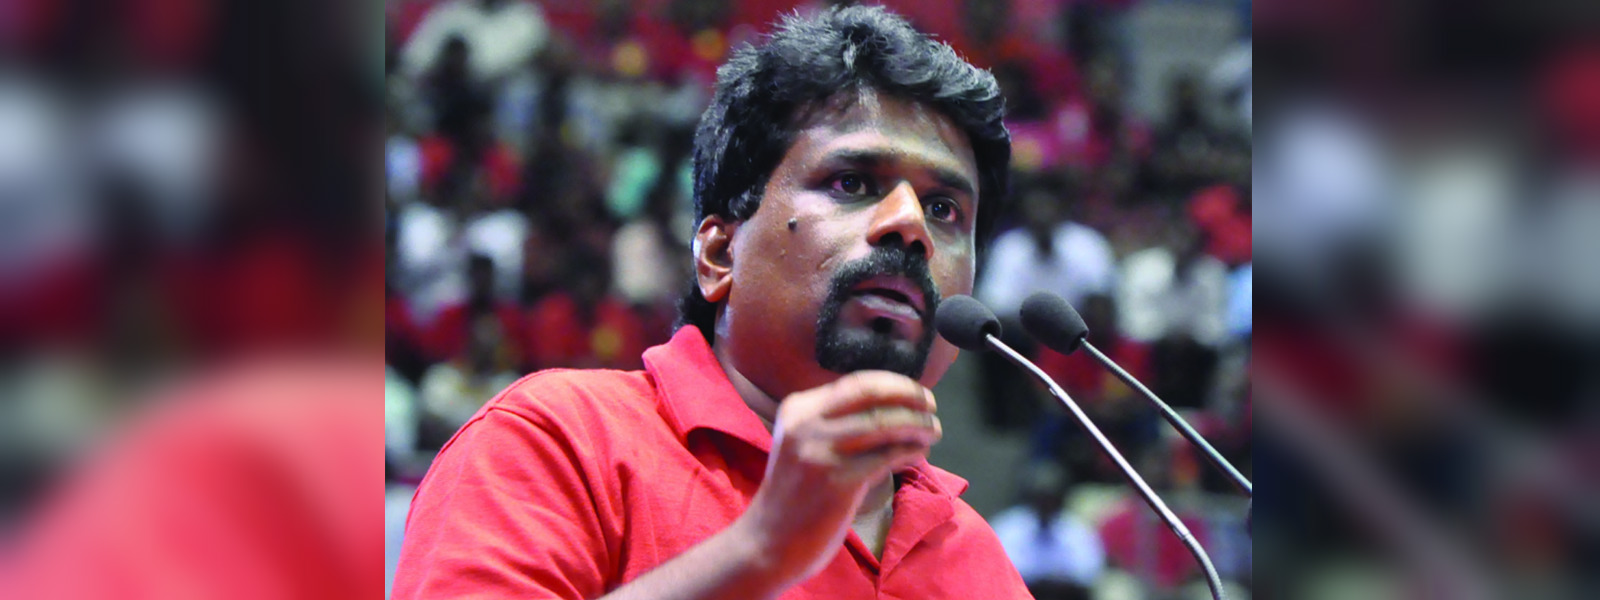 Anura Kumara speaks on the damage caused to the eco-system due to the decisions made by the government